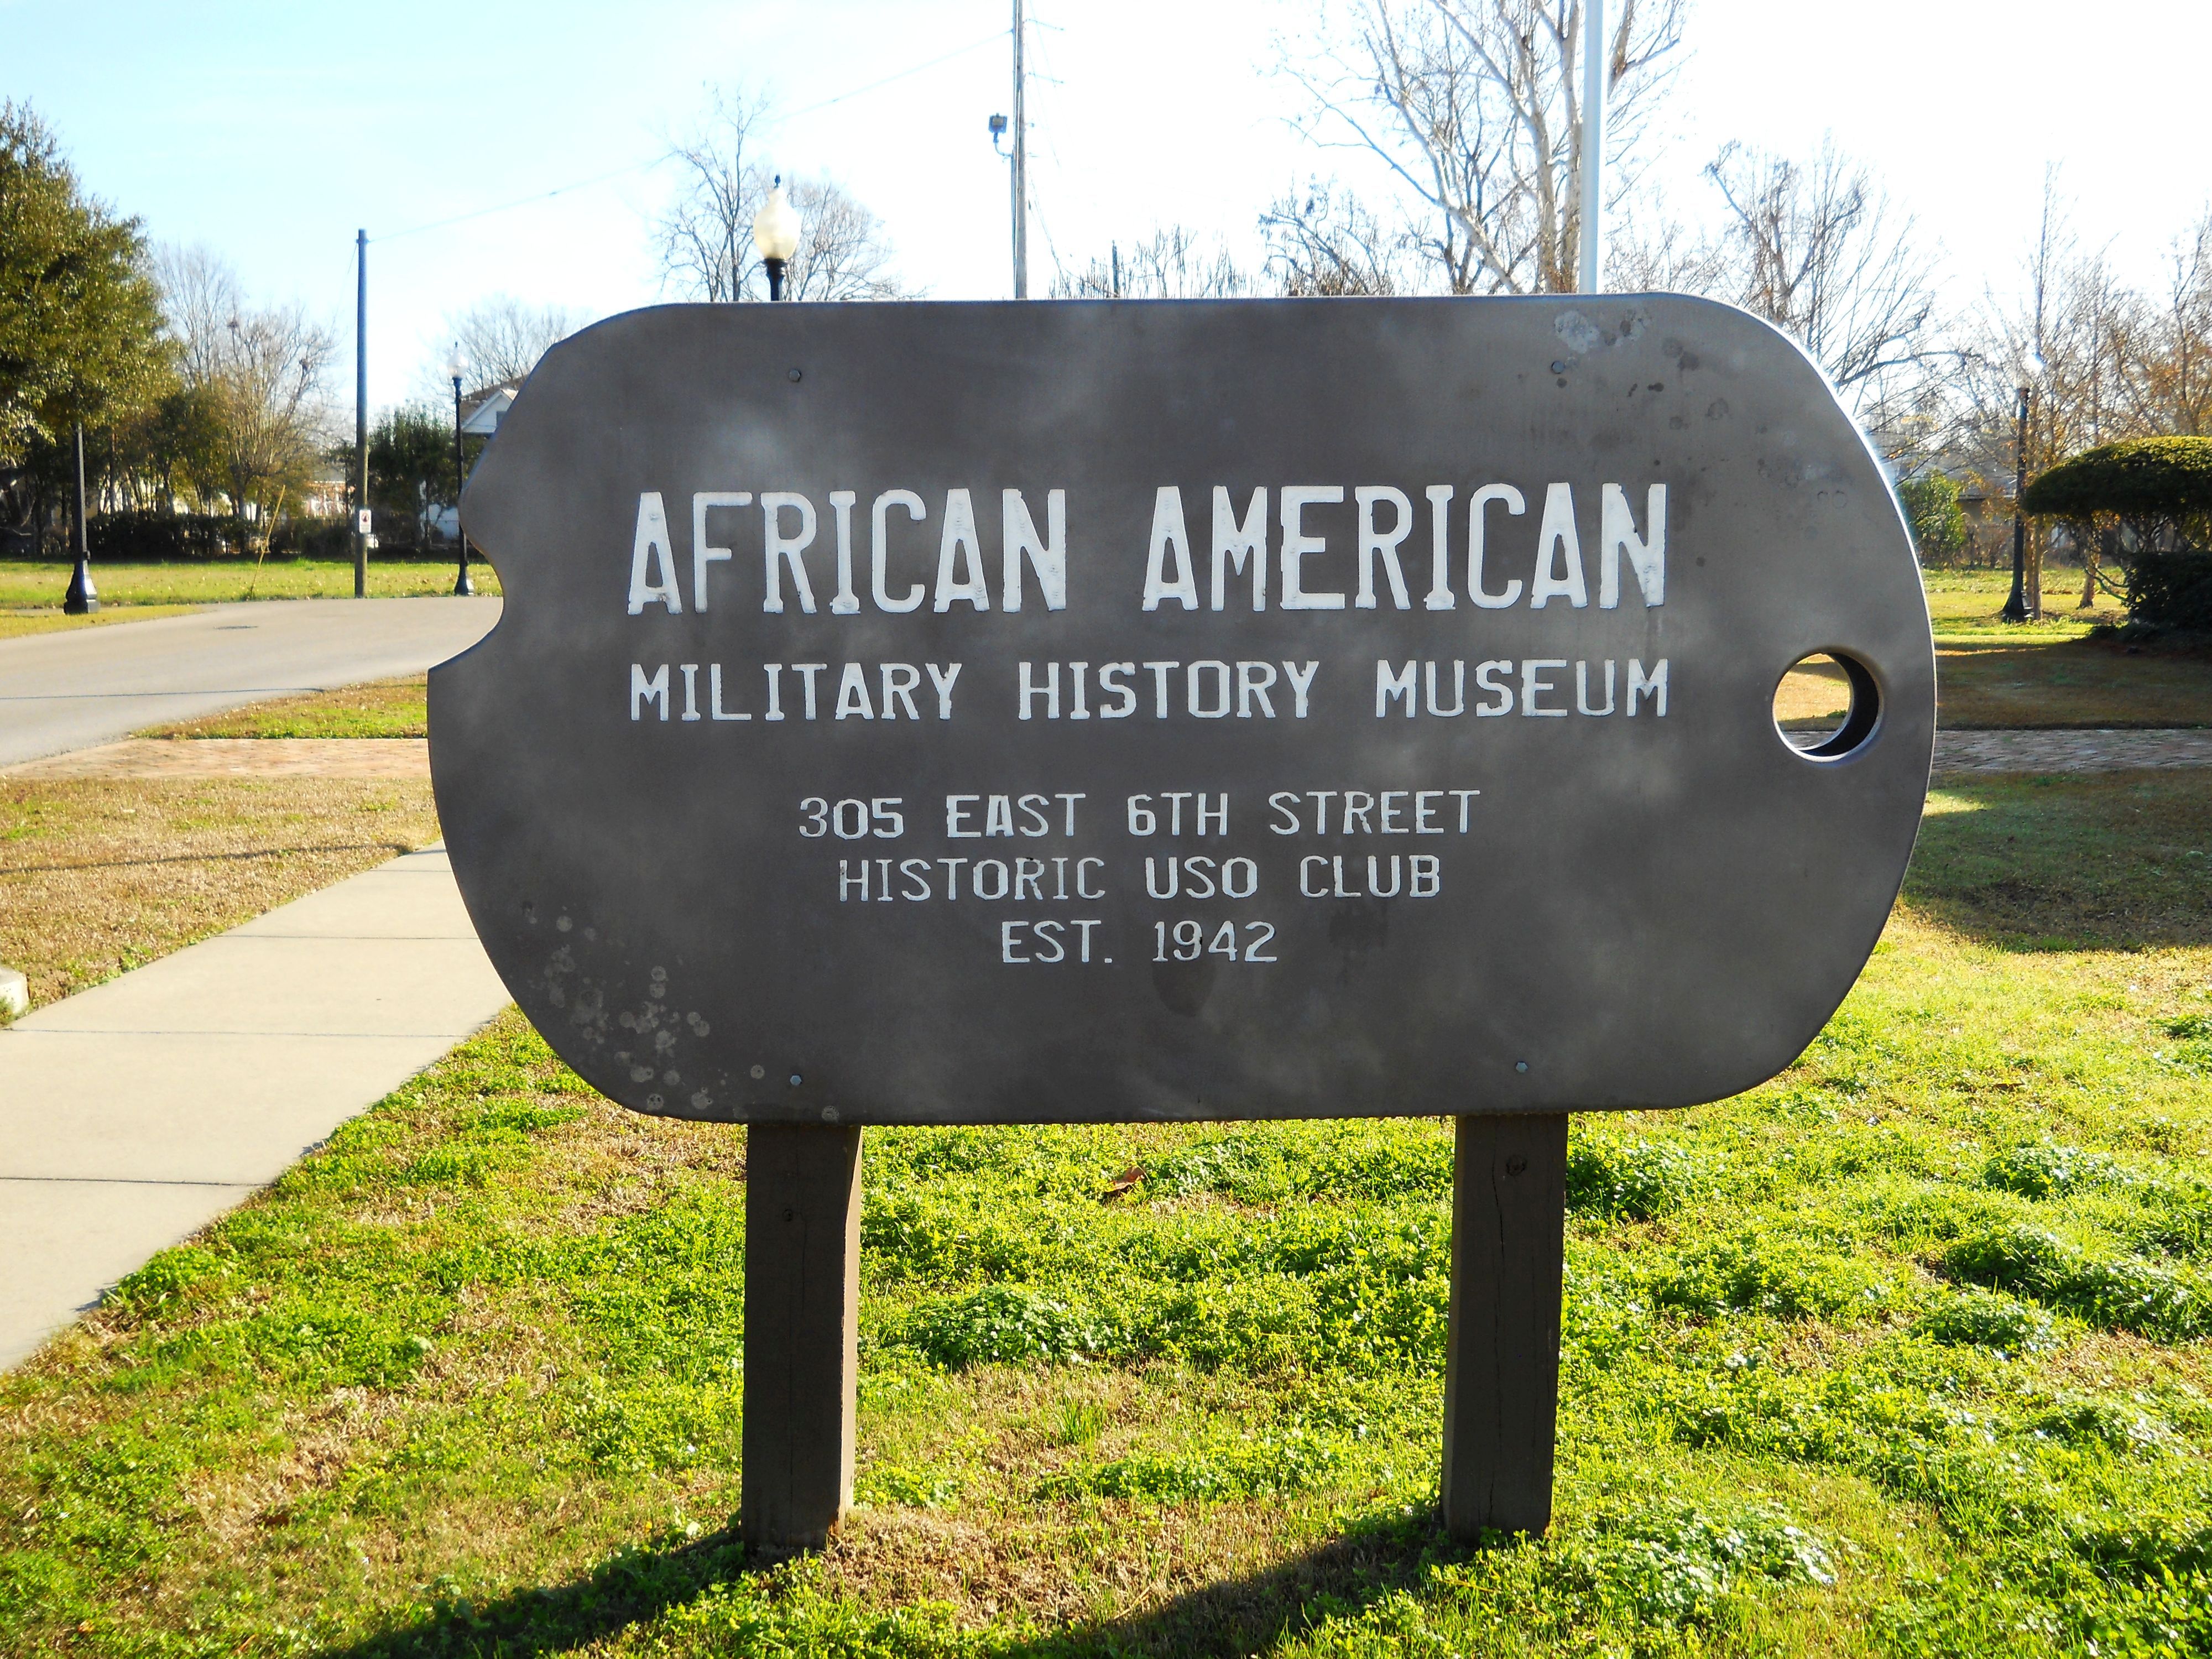 African American Military History Museum, Hattiesburg. https://commons.wikimedia.org/w/index.php?search=African-American+Military+History+Museum+hattiesburg&title=Special:MediaSearch&go=Go&type=image